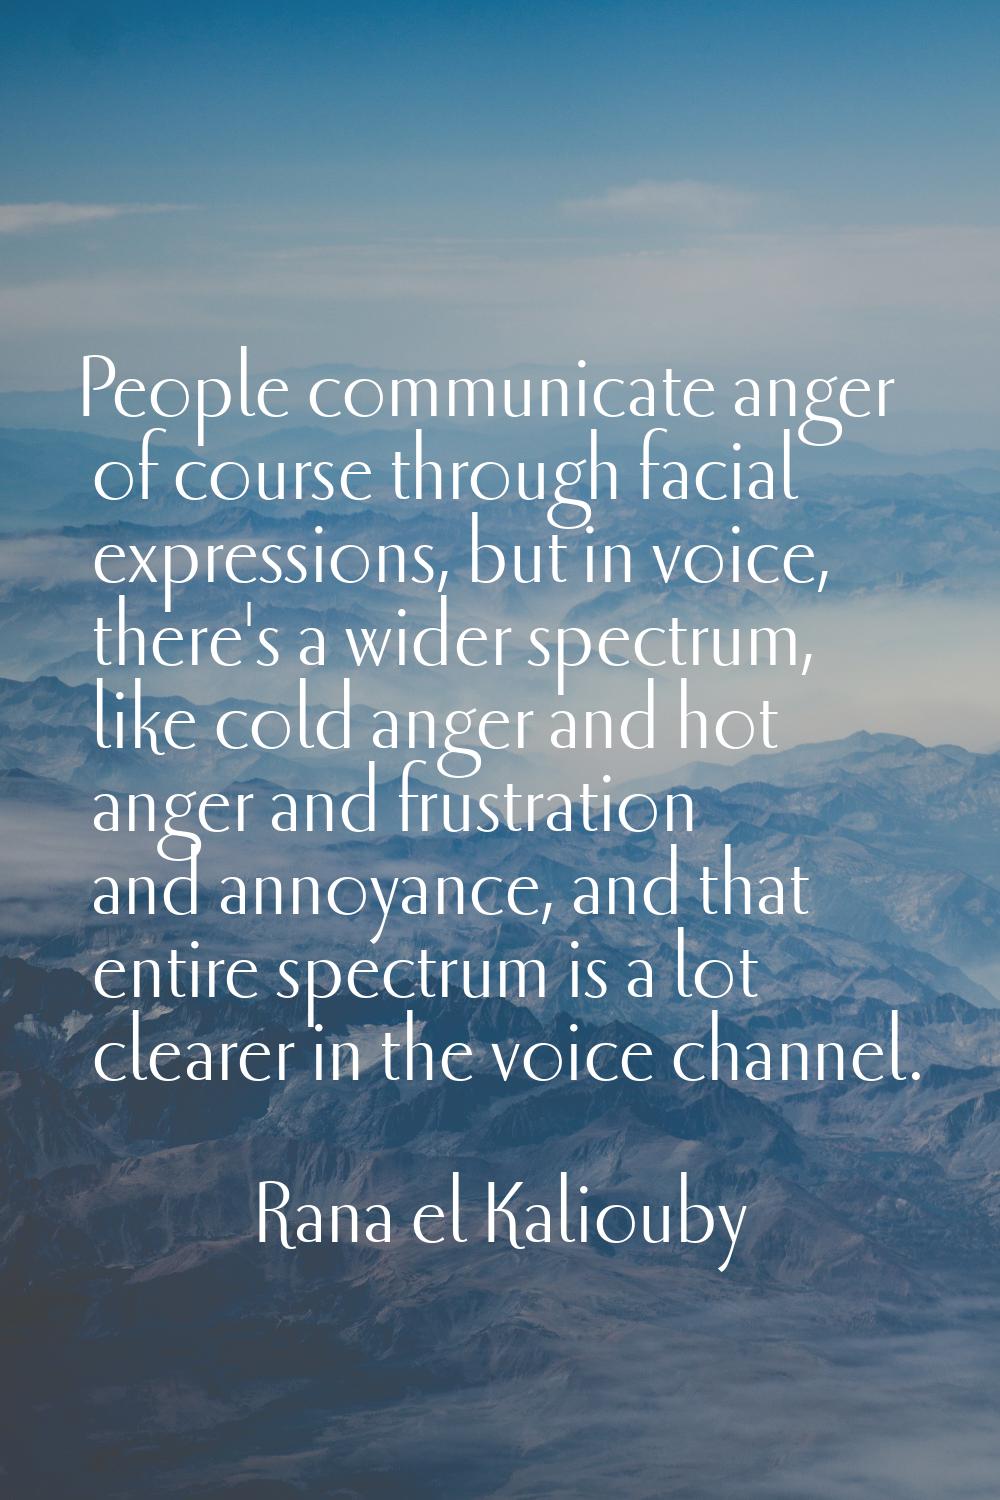 People communicate anger of course through facial expressions, but in voice, there's a wider spectr